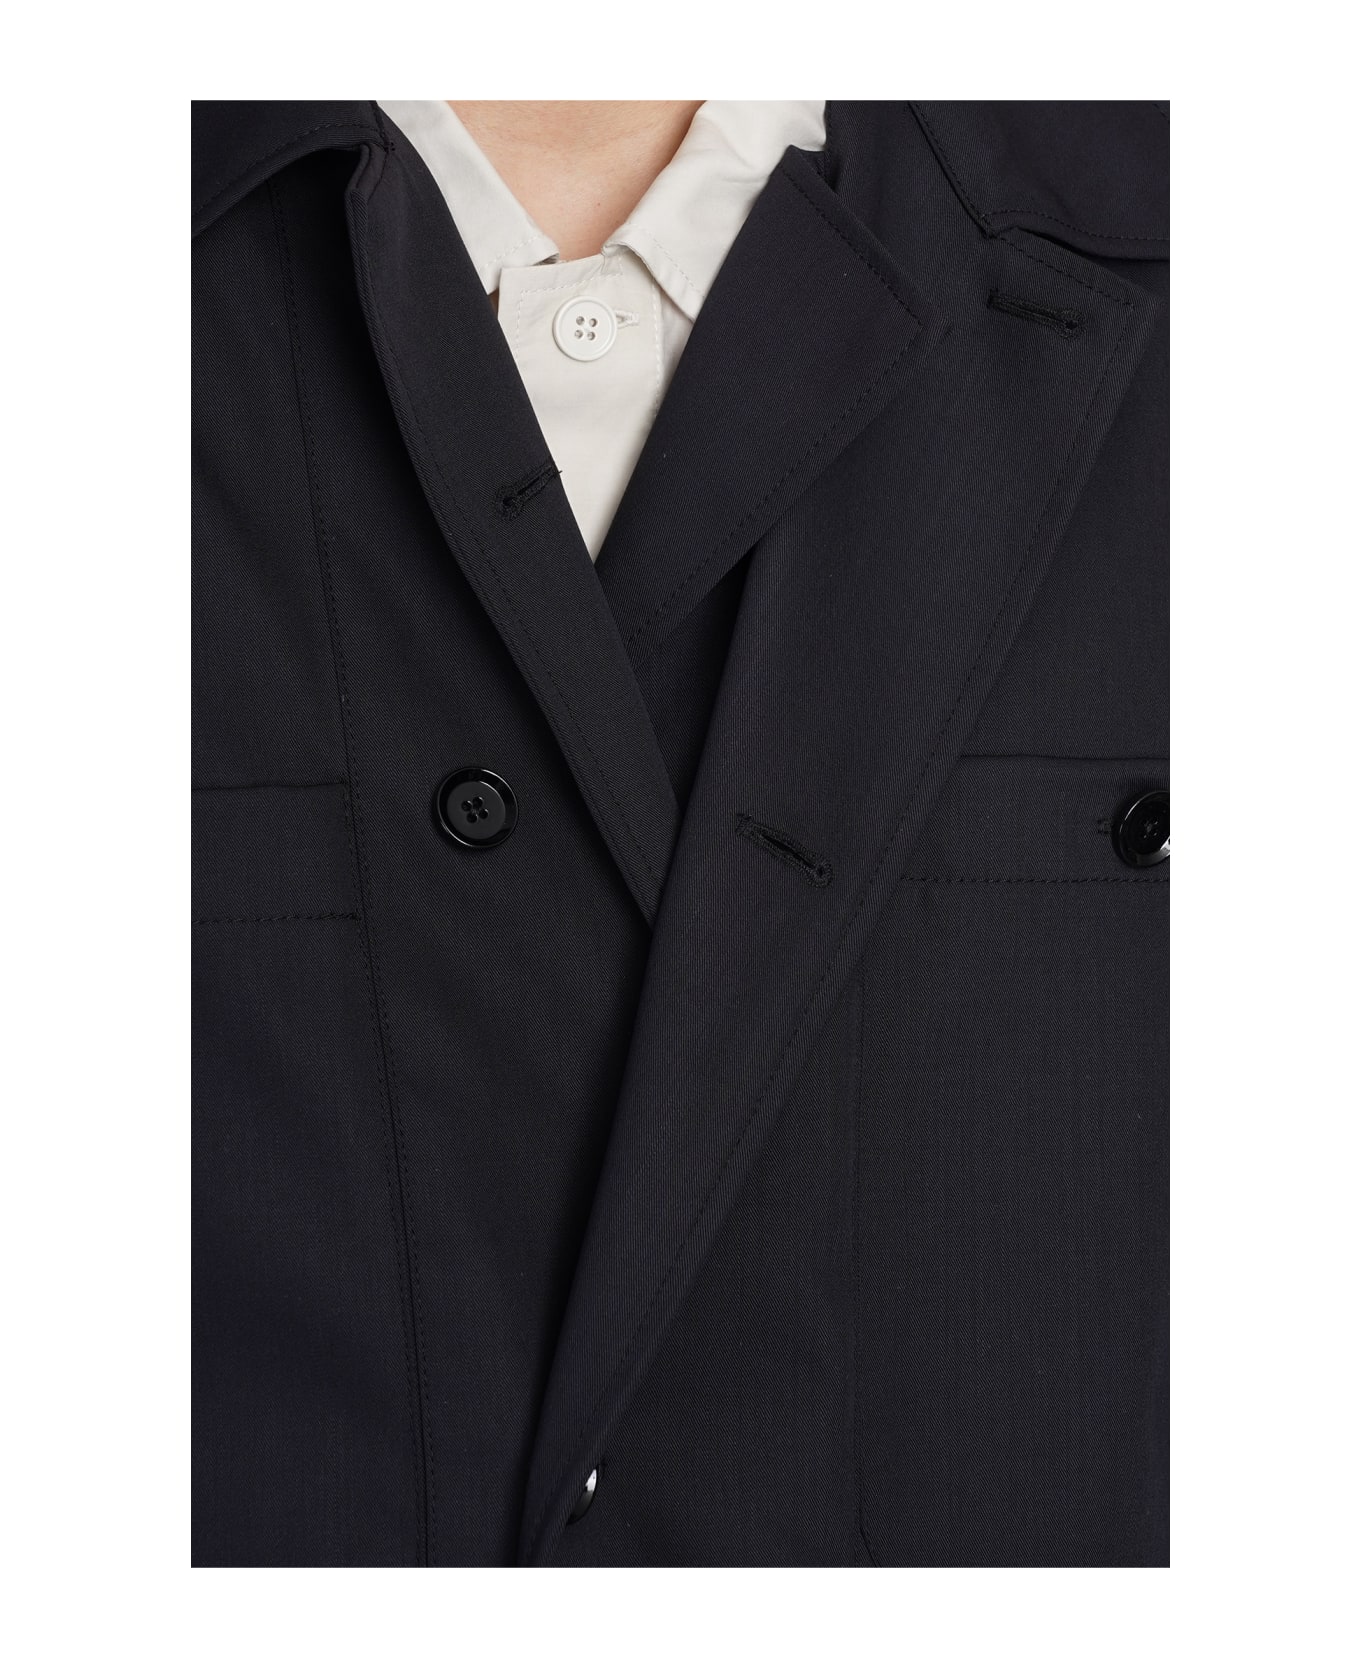 Lemaire Lon Sleeved Buttoned Shirt Jacket - Black